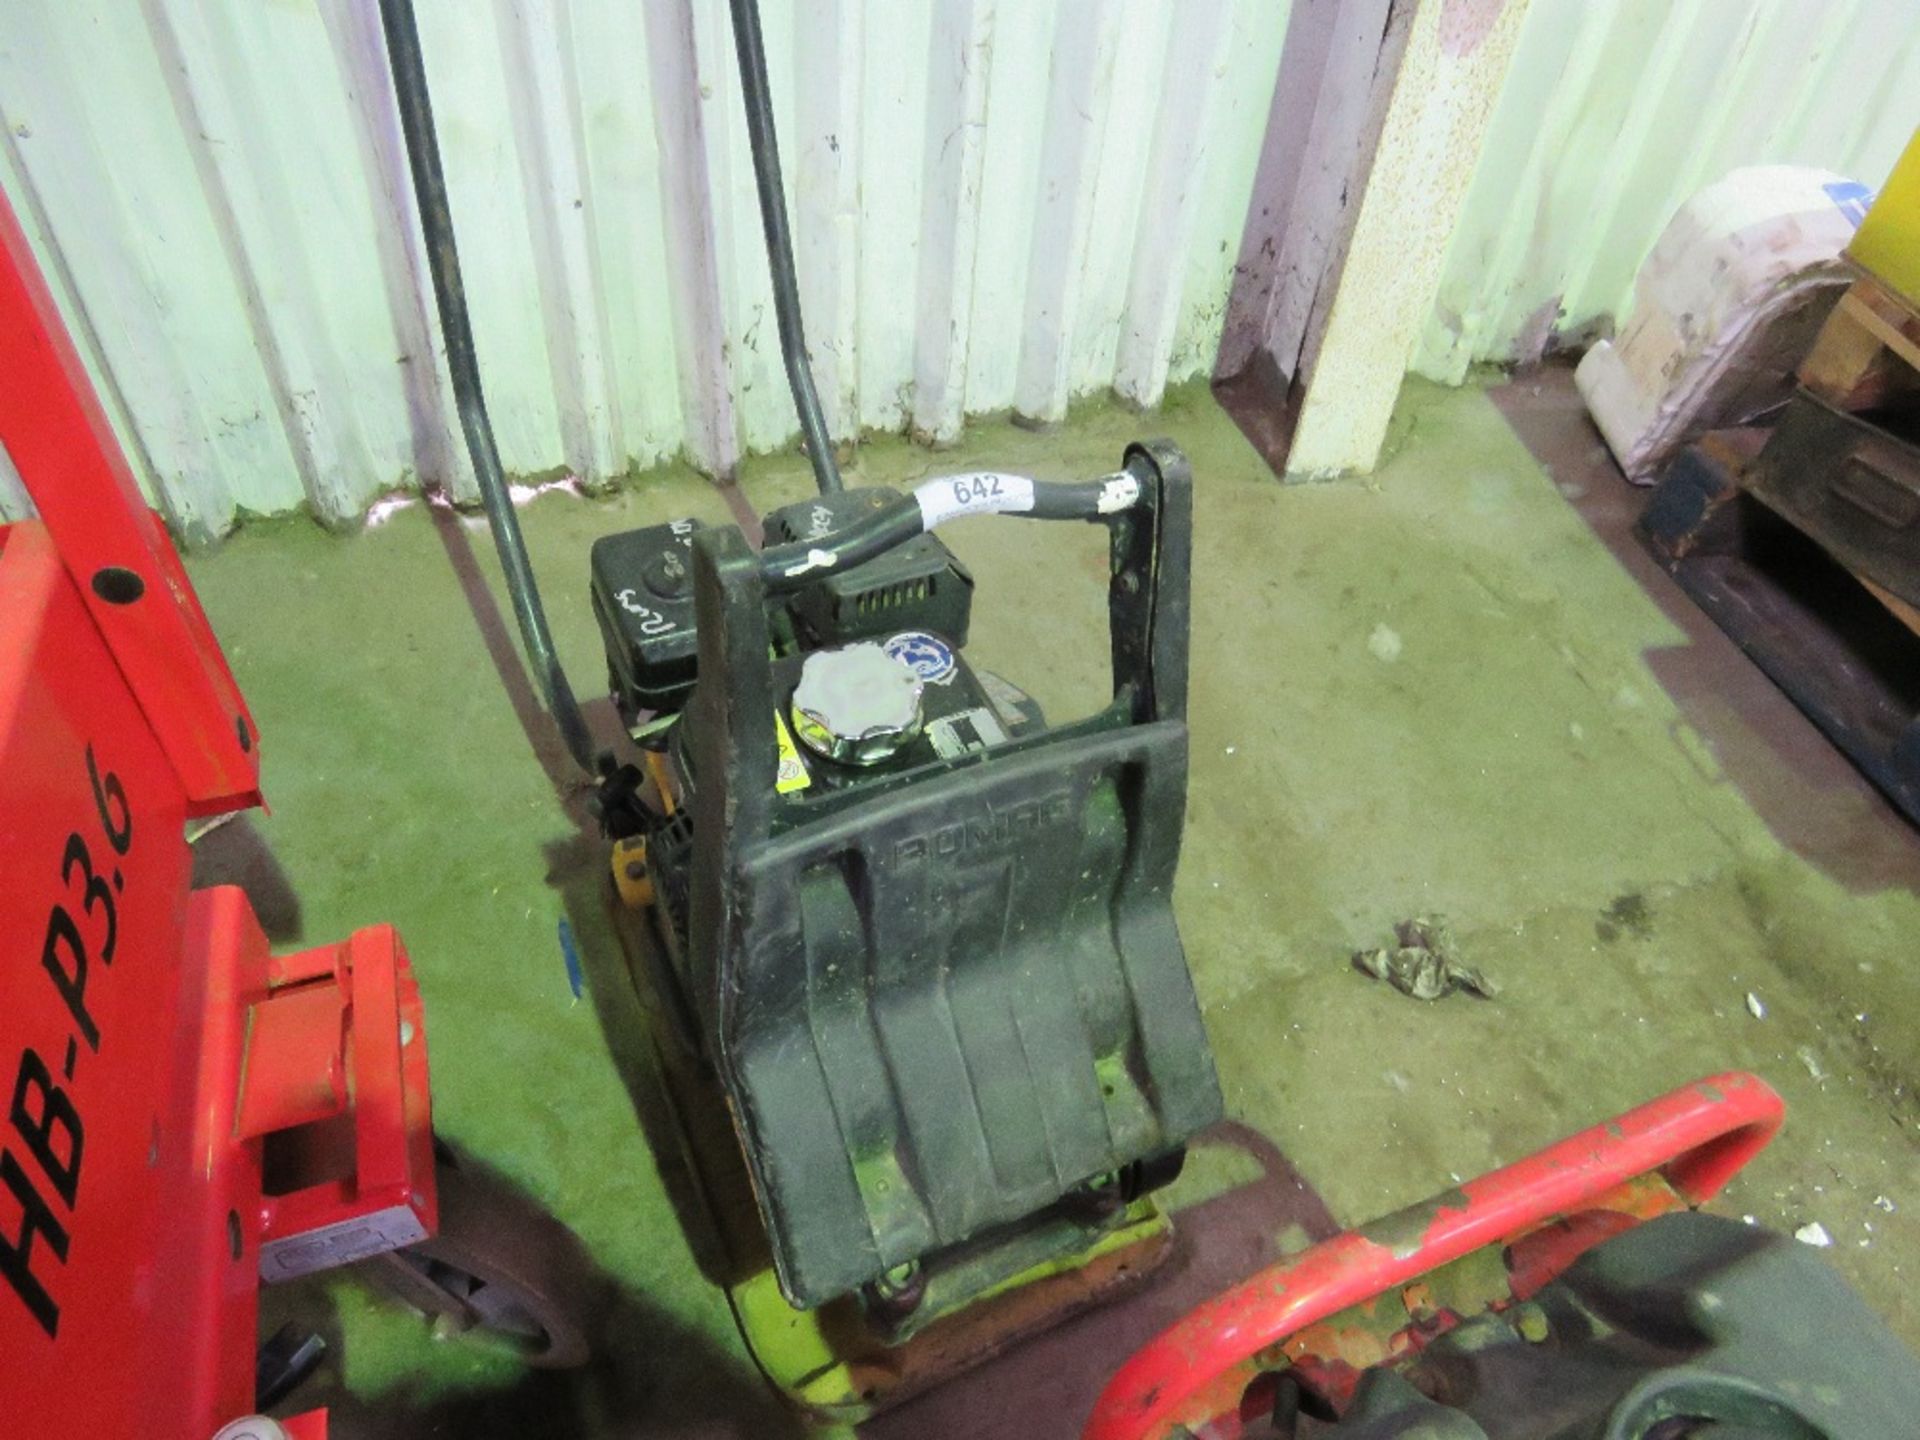 BOMAG PETROL ENGINED COMPACTION PLATE. WHEN TESTED WAS SEEN TO RUN AND VIBRATE - Image 2 of 3